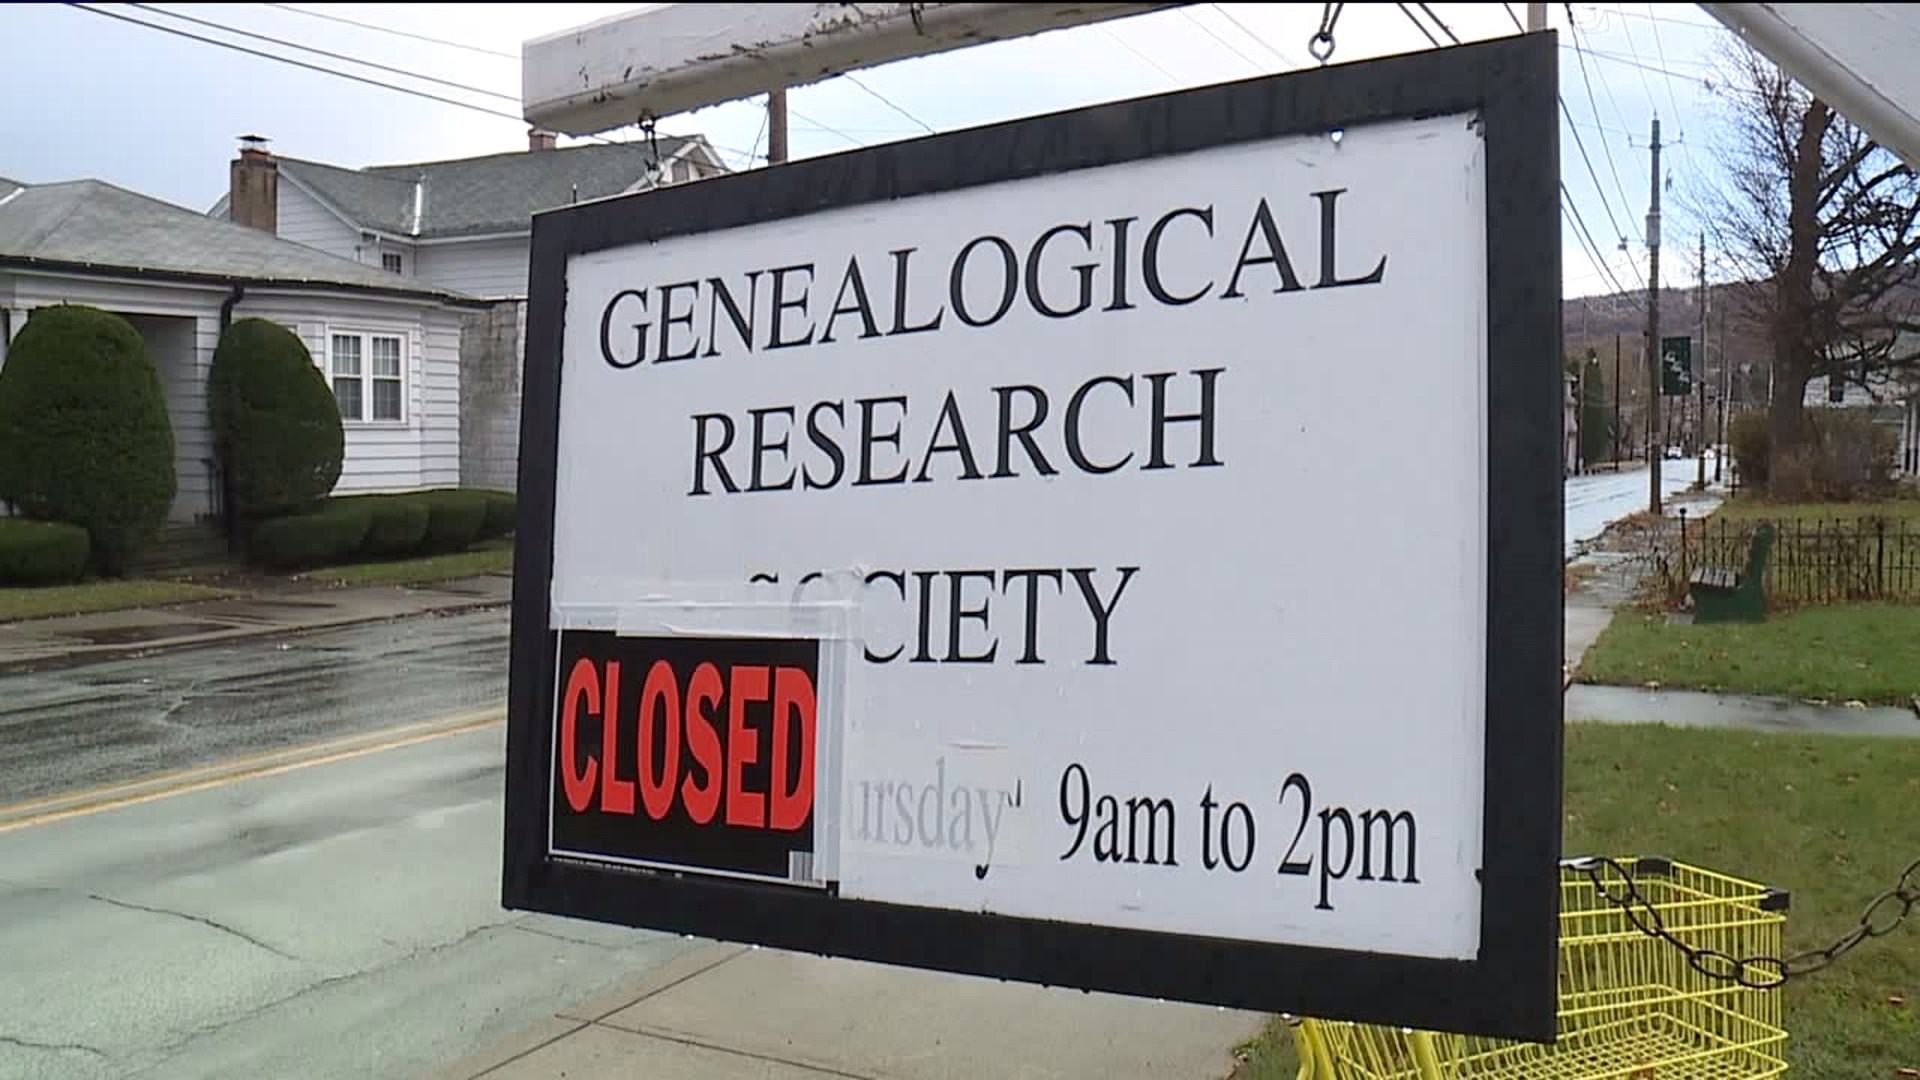 Genealogical Research Society Shut Down